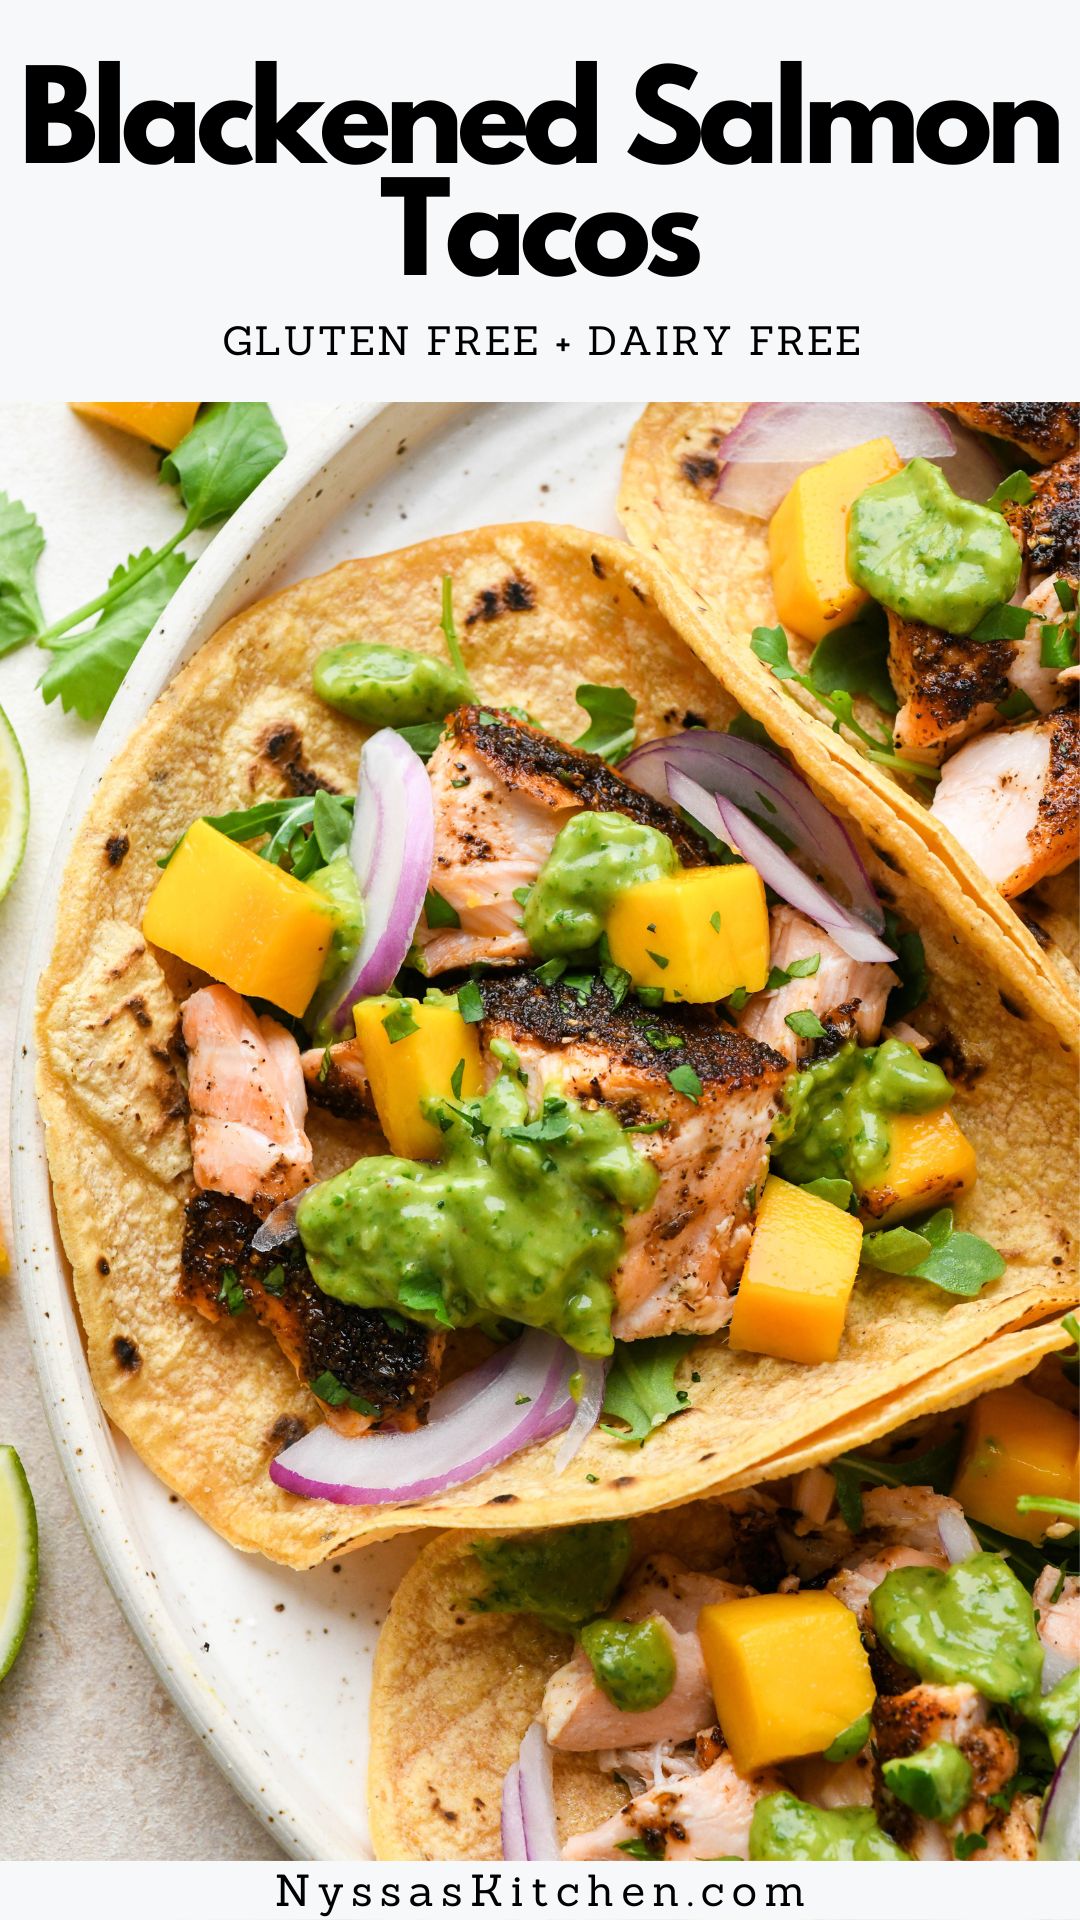 Level up your taco night by making blackened salmon tacos! Made with bold and flavorful blackened salmon and toppings like fresh mango, red onion, arugula, and a creamy avocado green sauce. A vibrant fish taco recipe that is so delicious! Gluten free, dairy free, and paleo / Whole30 option.